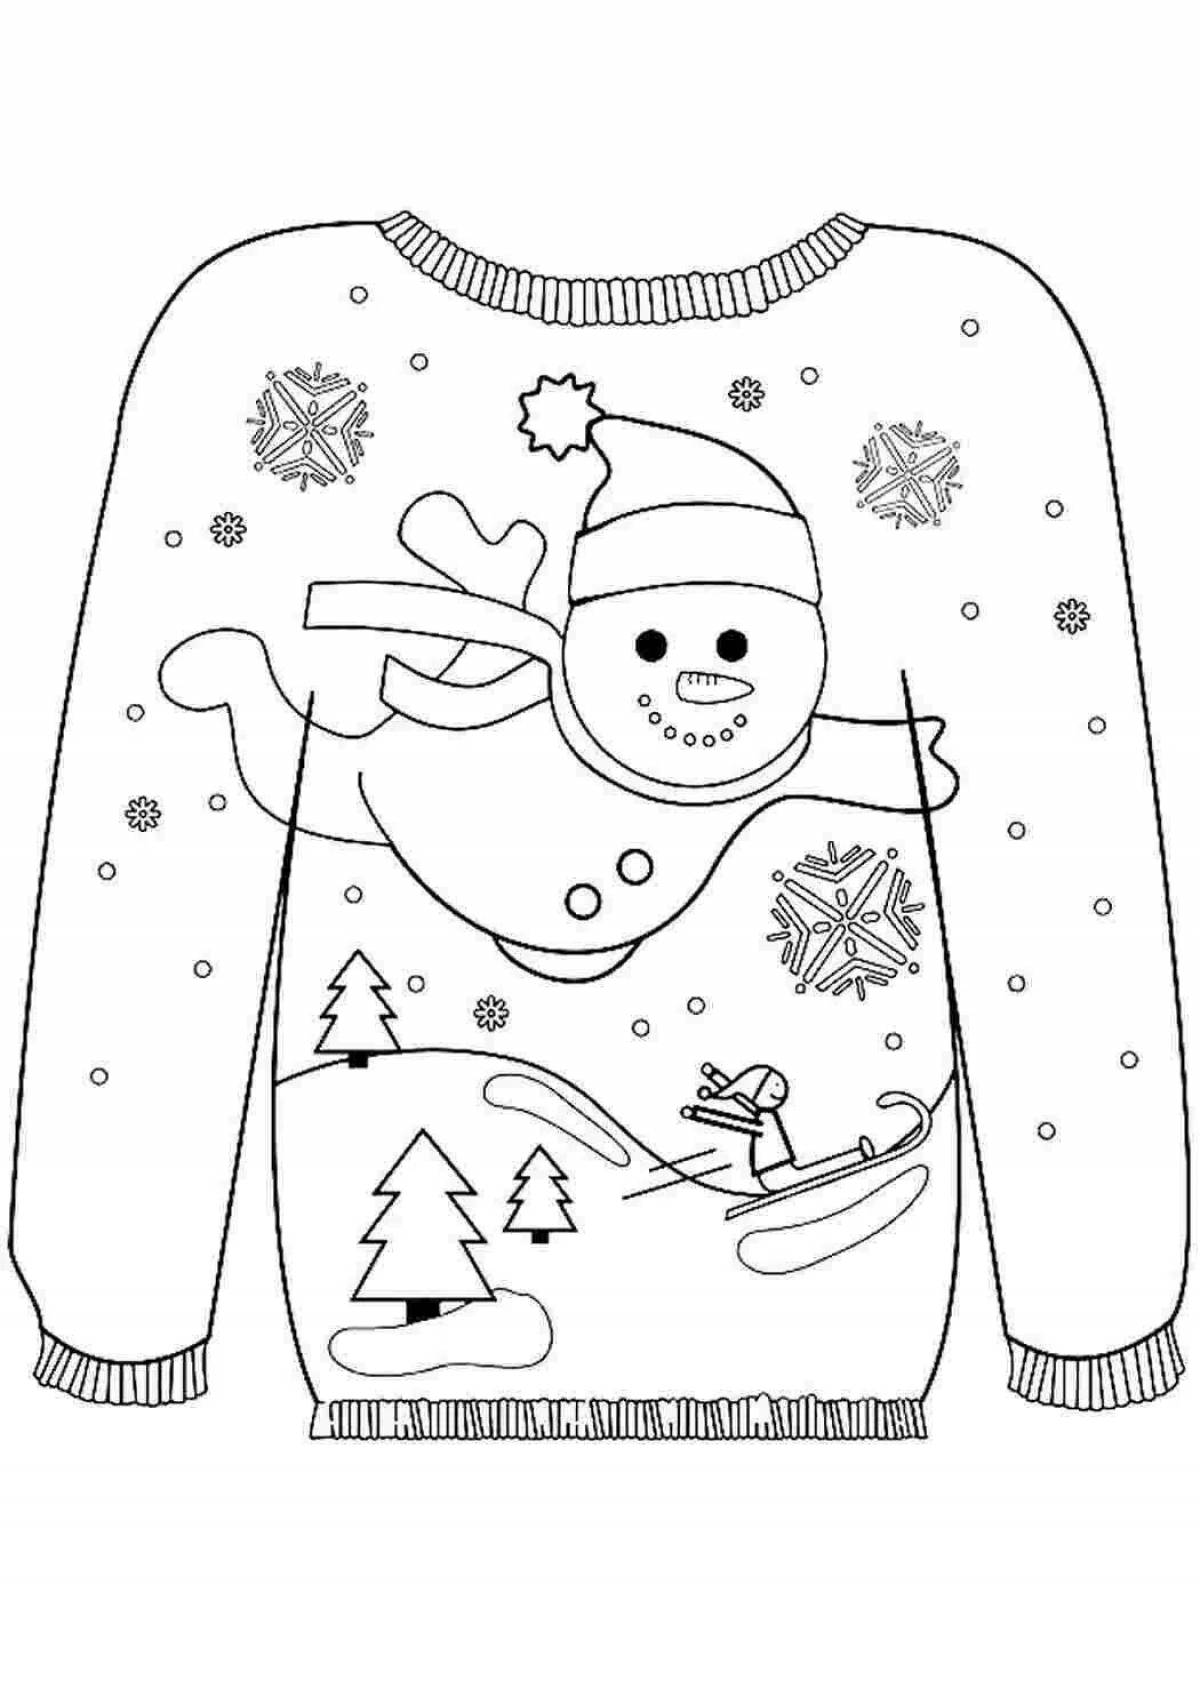 Outstanding winter clothes coloring page for 5-6 year olds